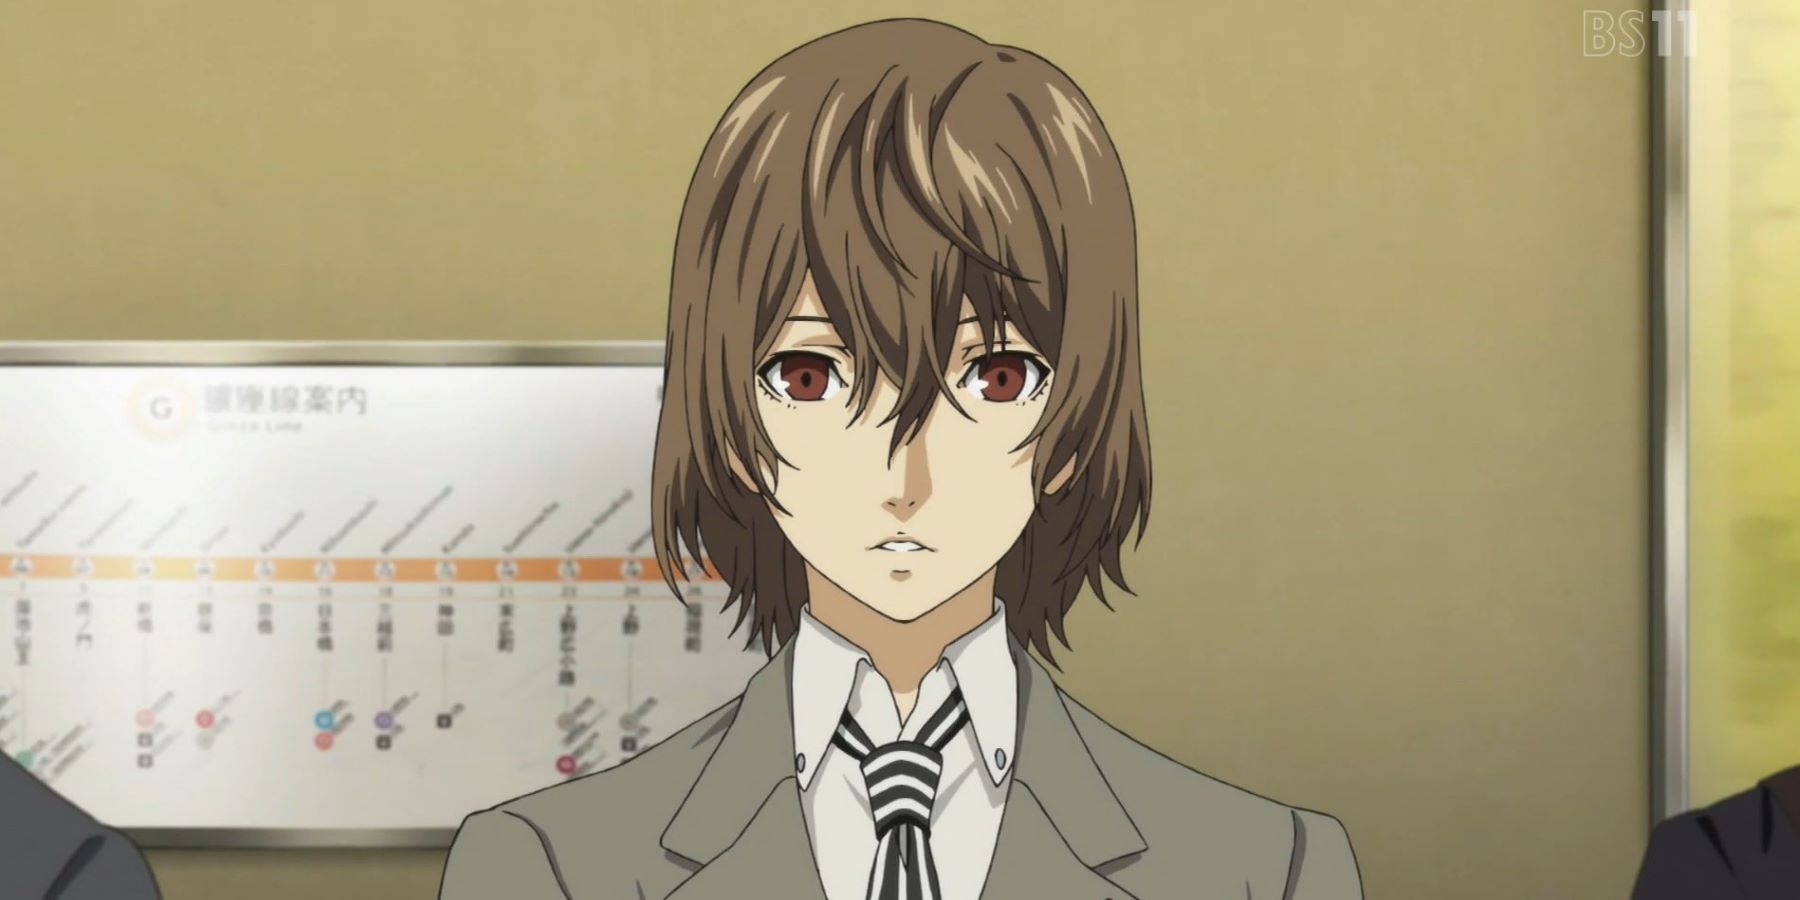 Goro Akechi standing in front of a metro map in the Persona 5 anime